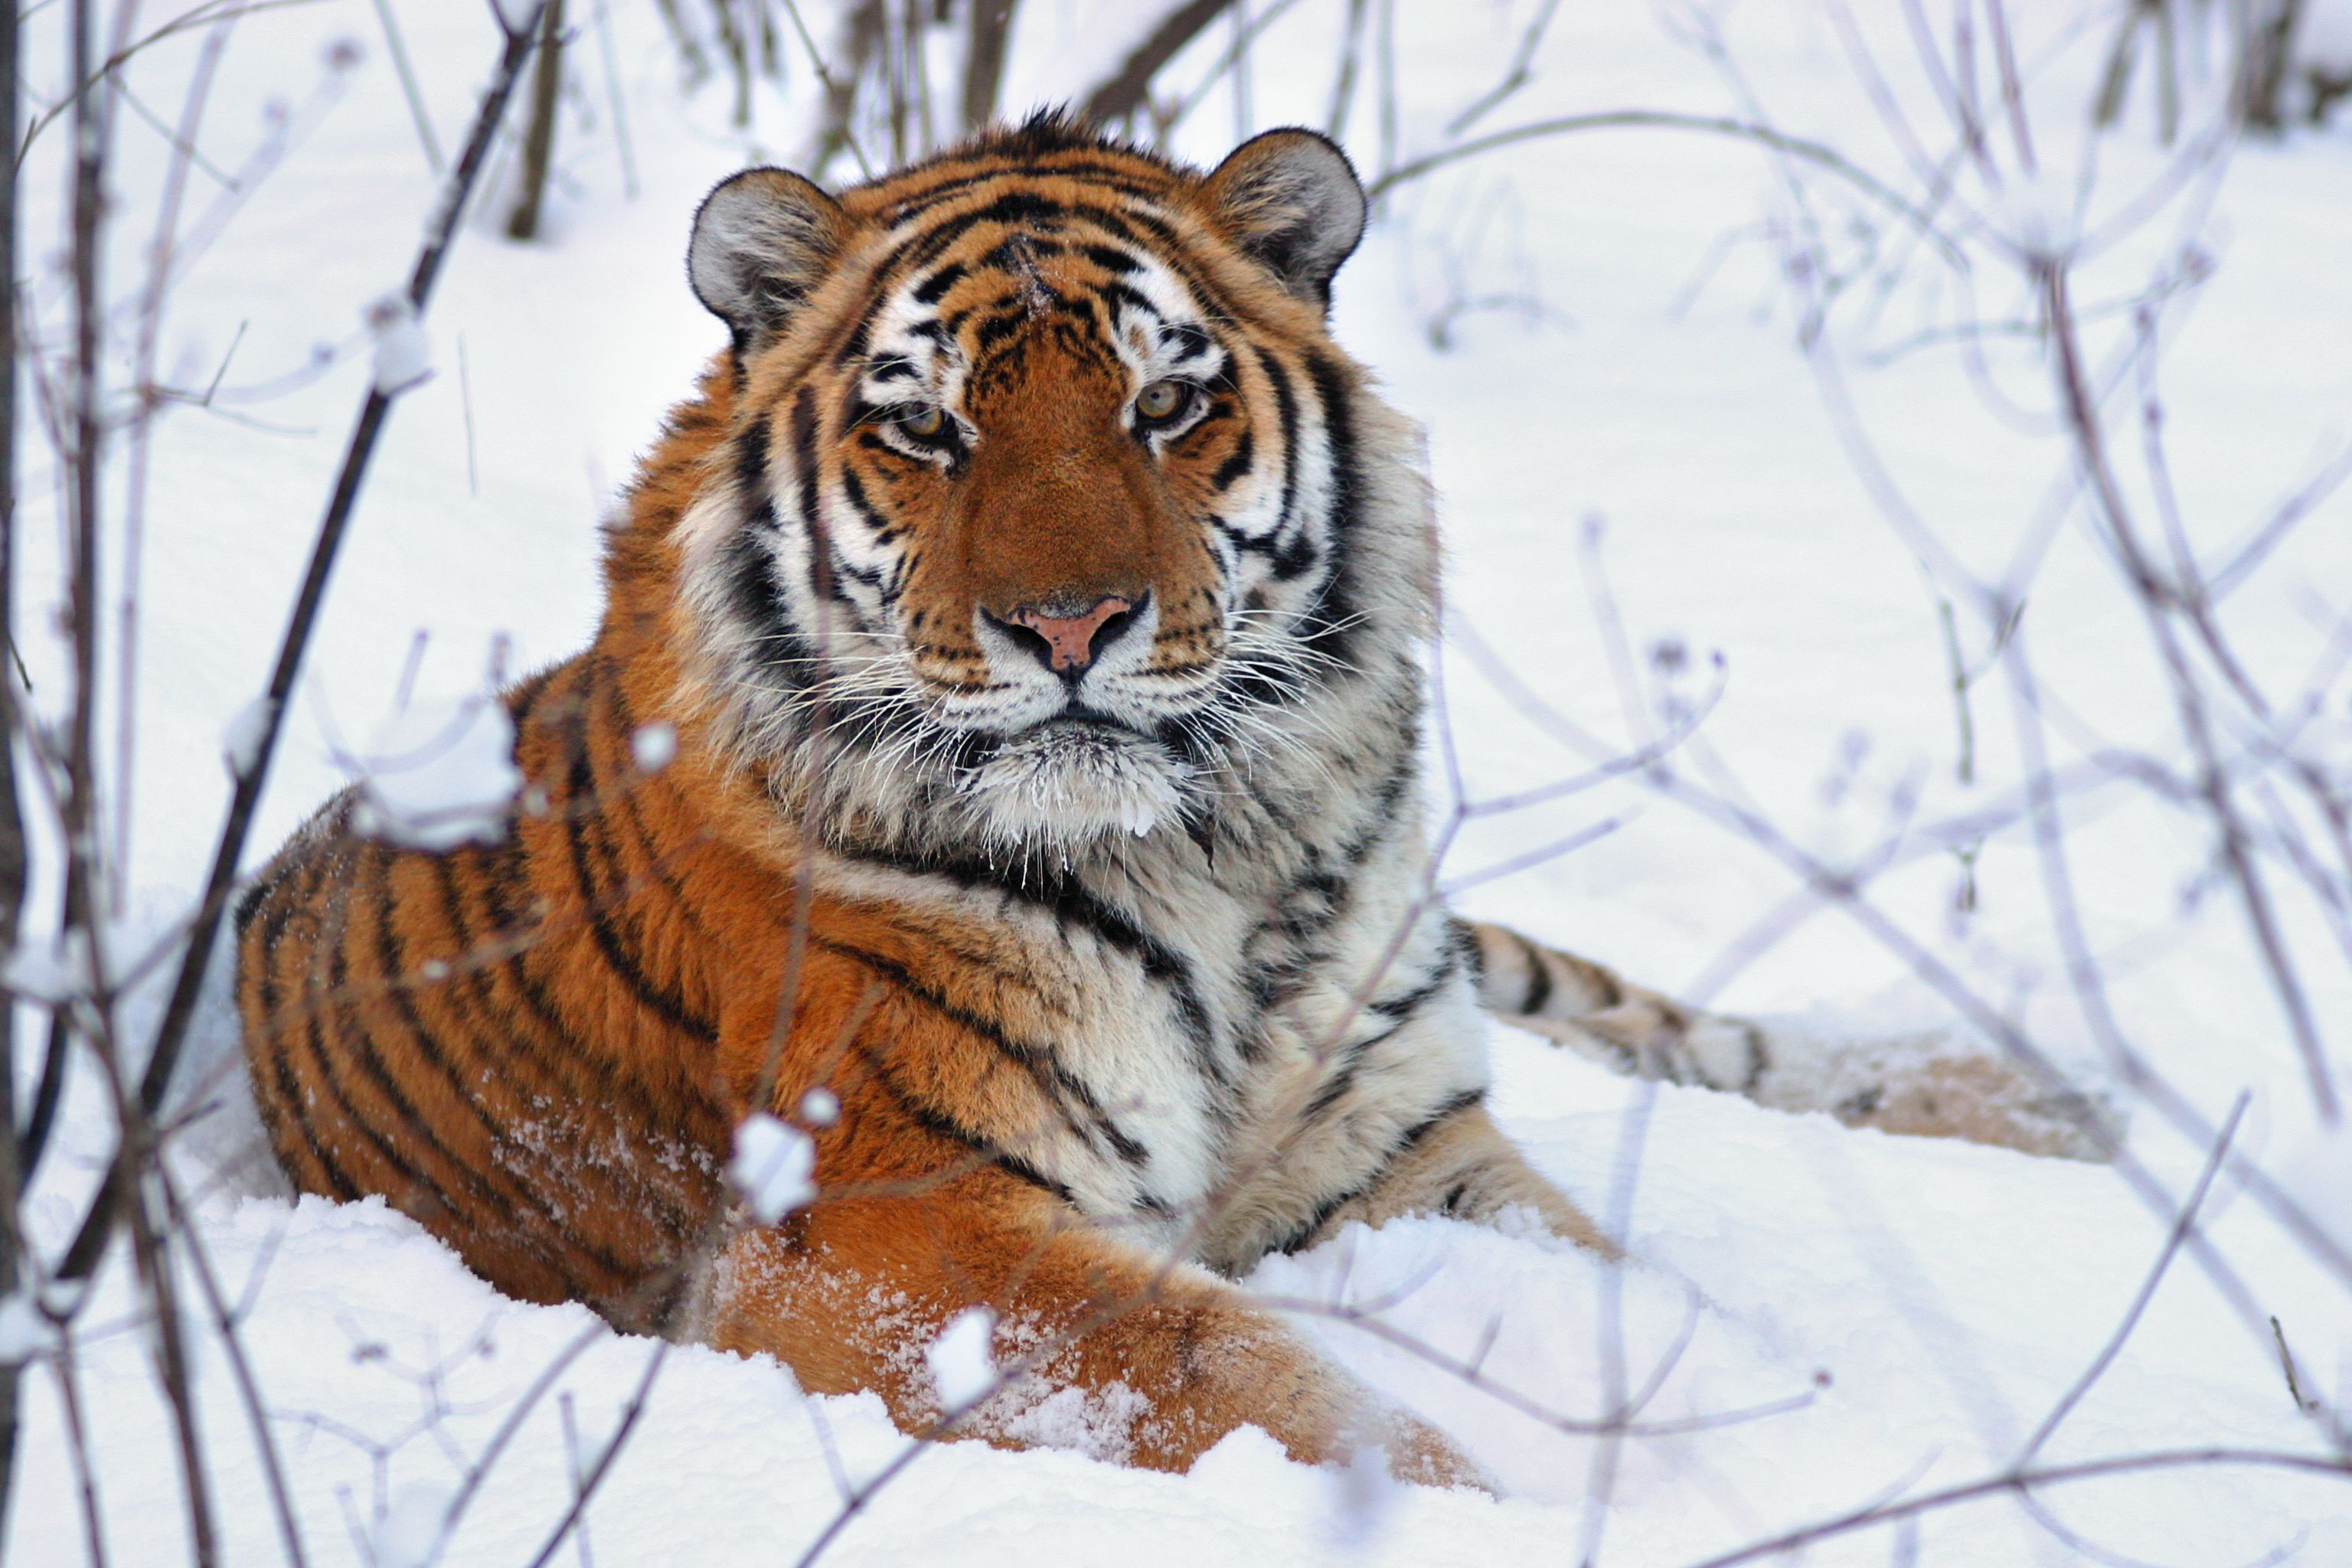 Are Bengal tigers bigger and stronger than Siberian tigers in the